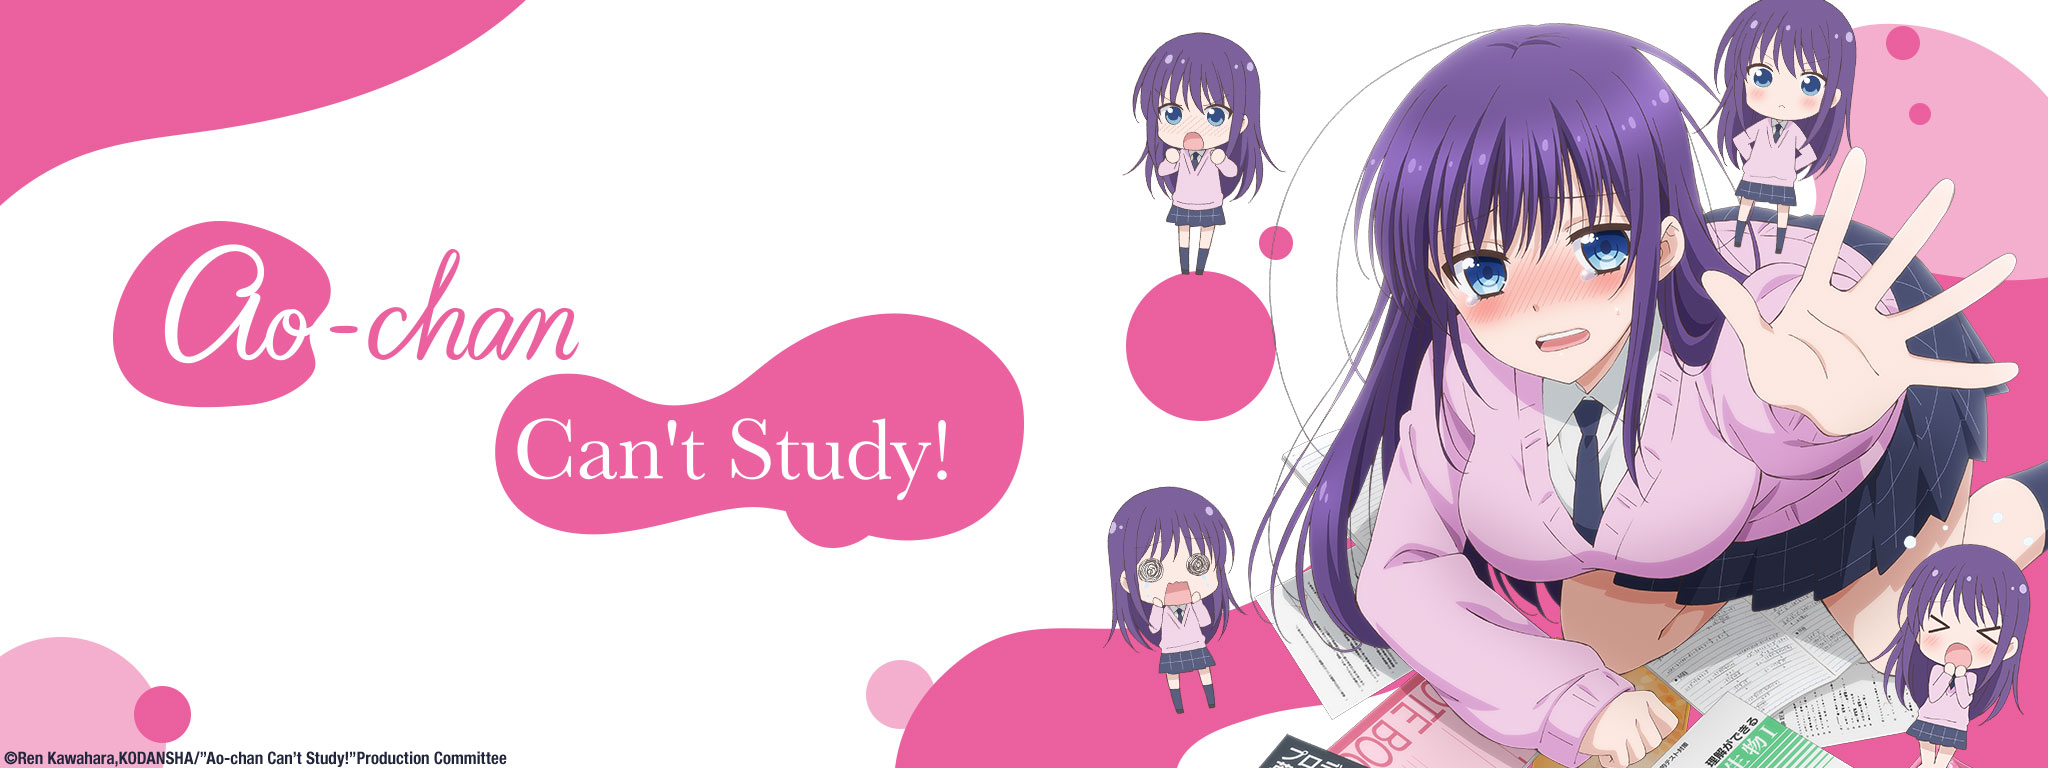 Title Art for Ao-chan Can't Study!